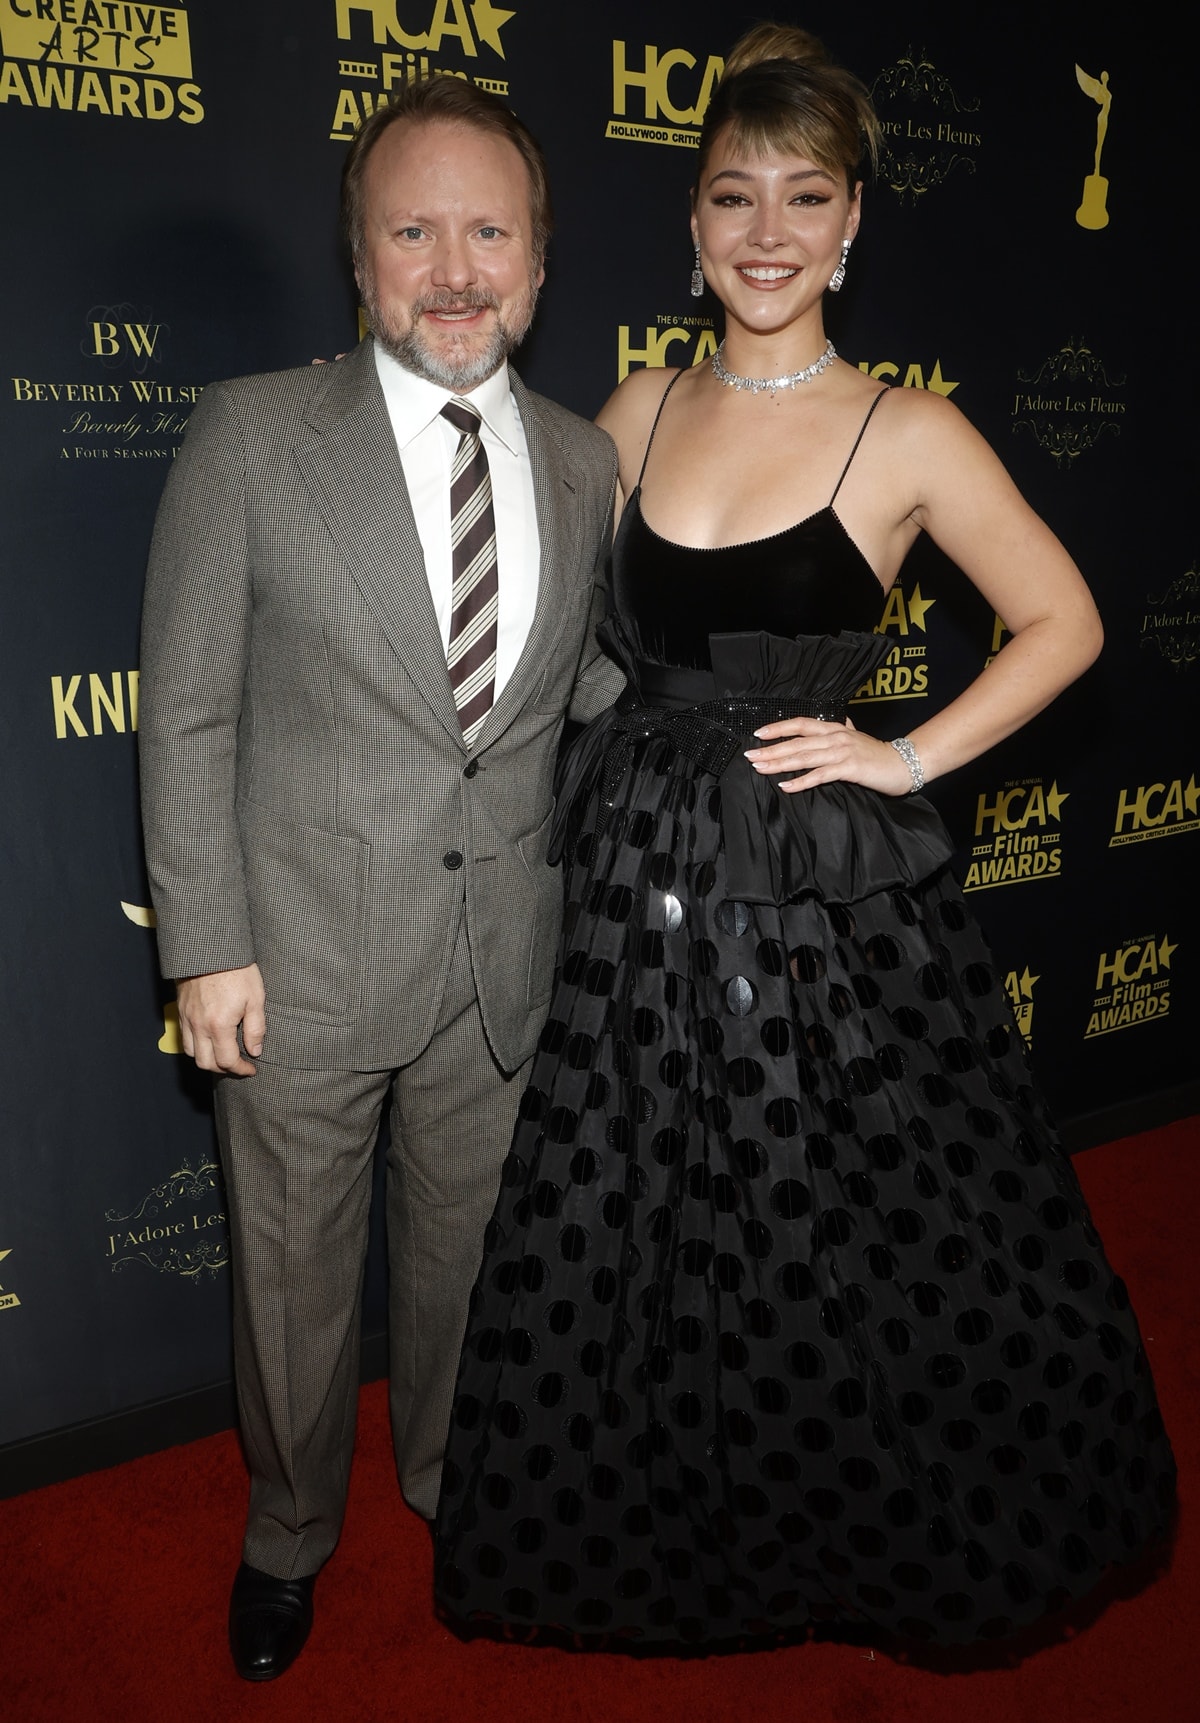 Joined by Golden Onion: A Knives Out Mystery director Rian Johnson, Madelyn Cline turned heads in a stunning black dress with a low-cut neckline and spaghetti straps that flaunted her toned arms at the Hollywood Critics Association's 2023 HCA Film Awards